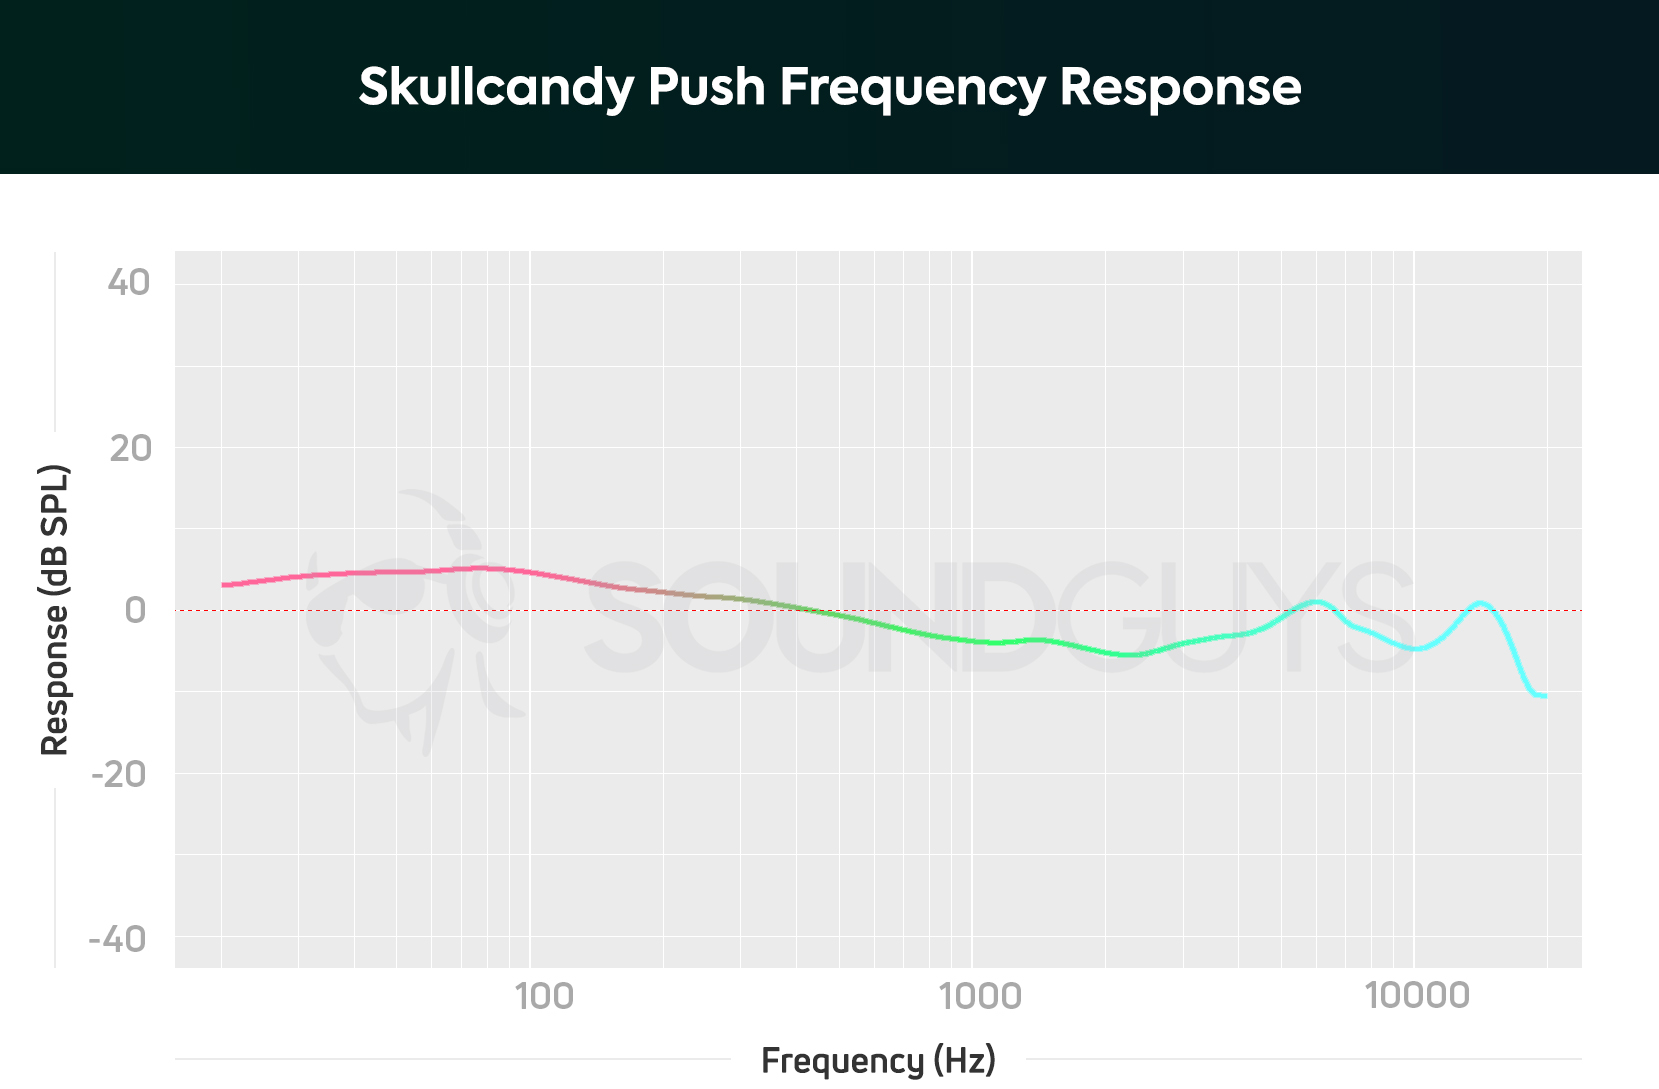 Frequency response of the Skullcandy Push.